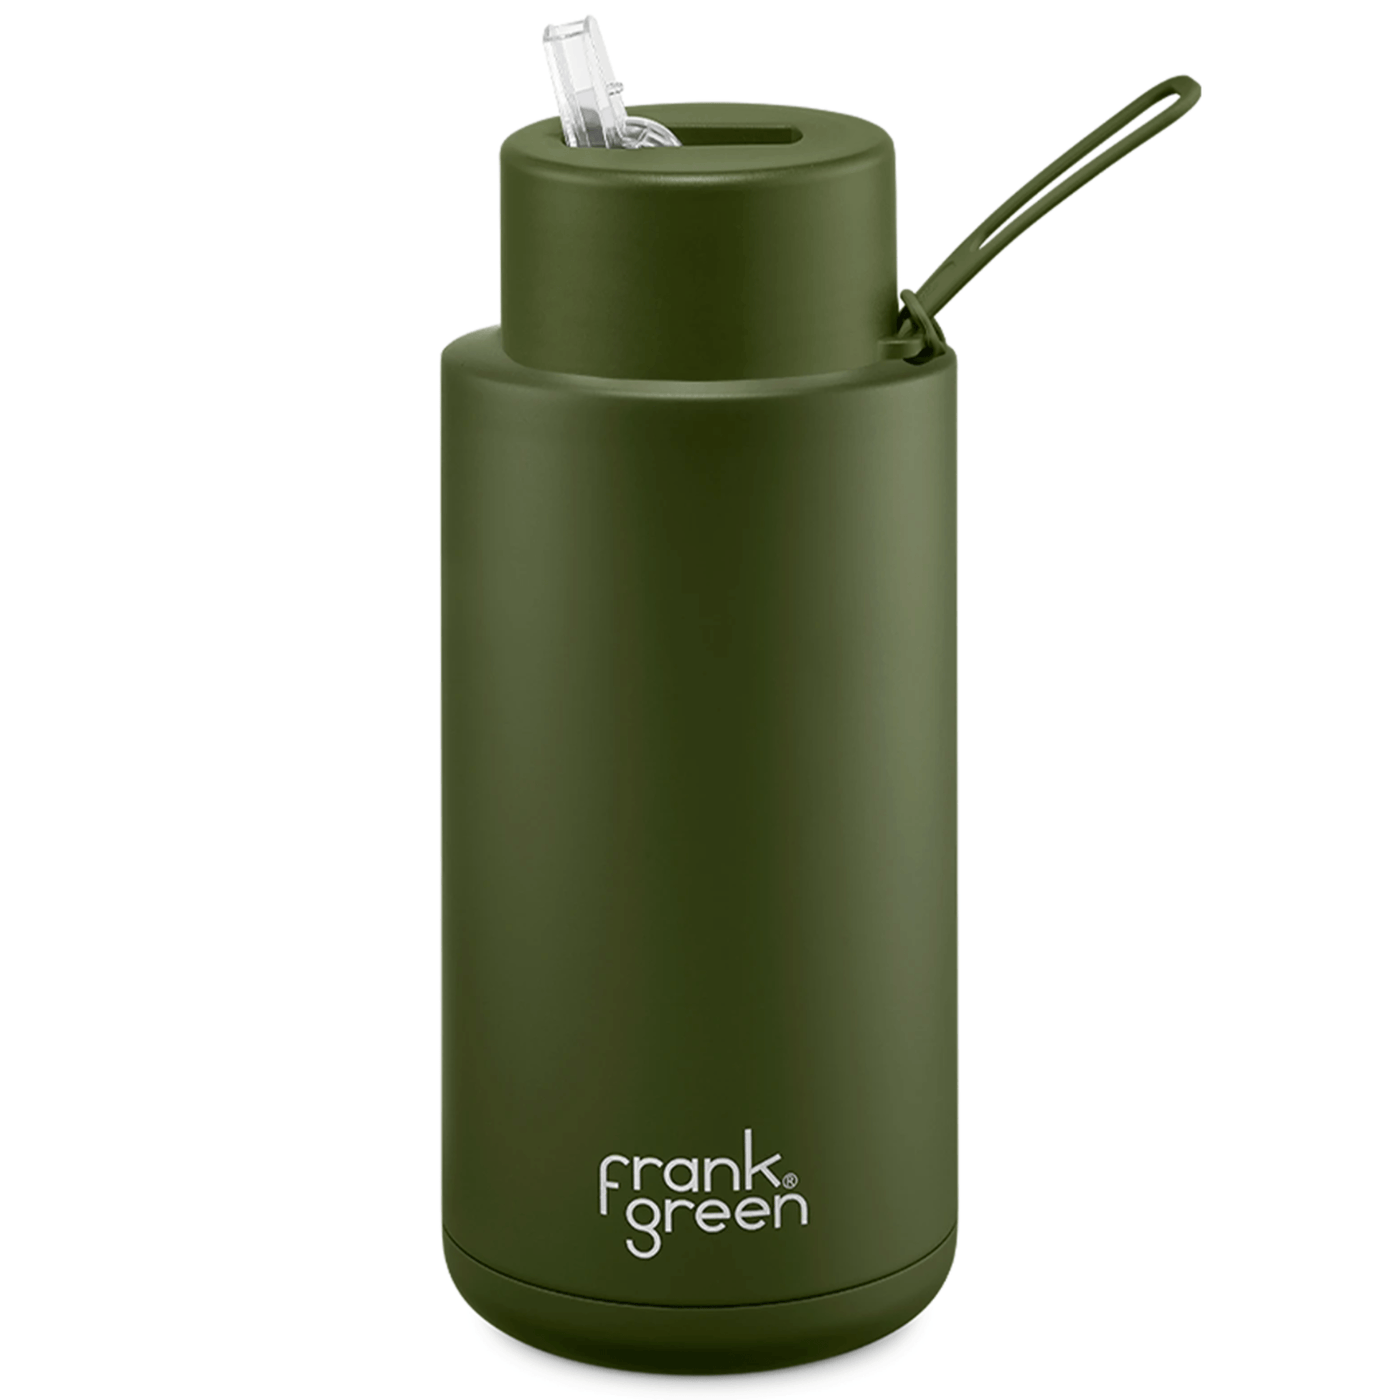 Frank Green Stainless Steel Drinking Flask With Straw in Khaki